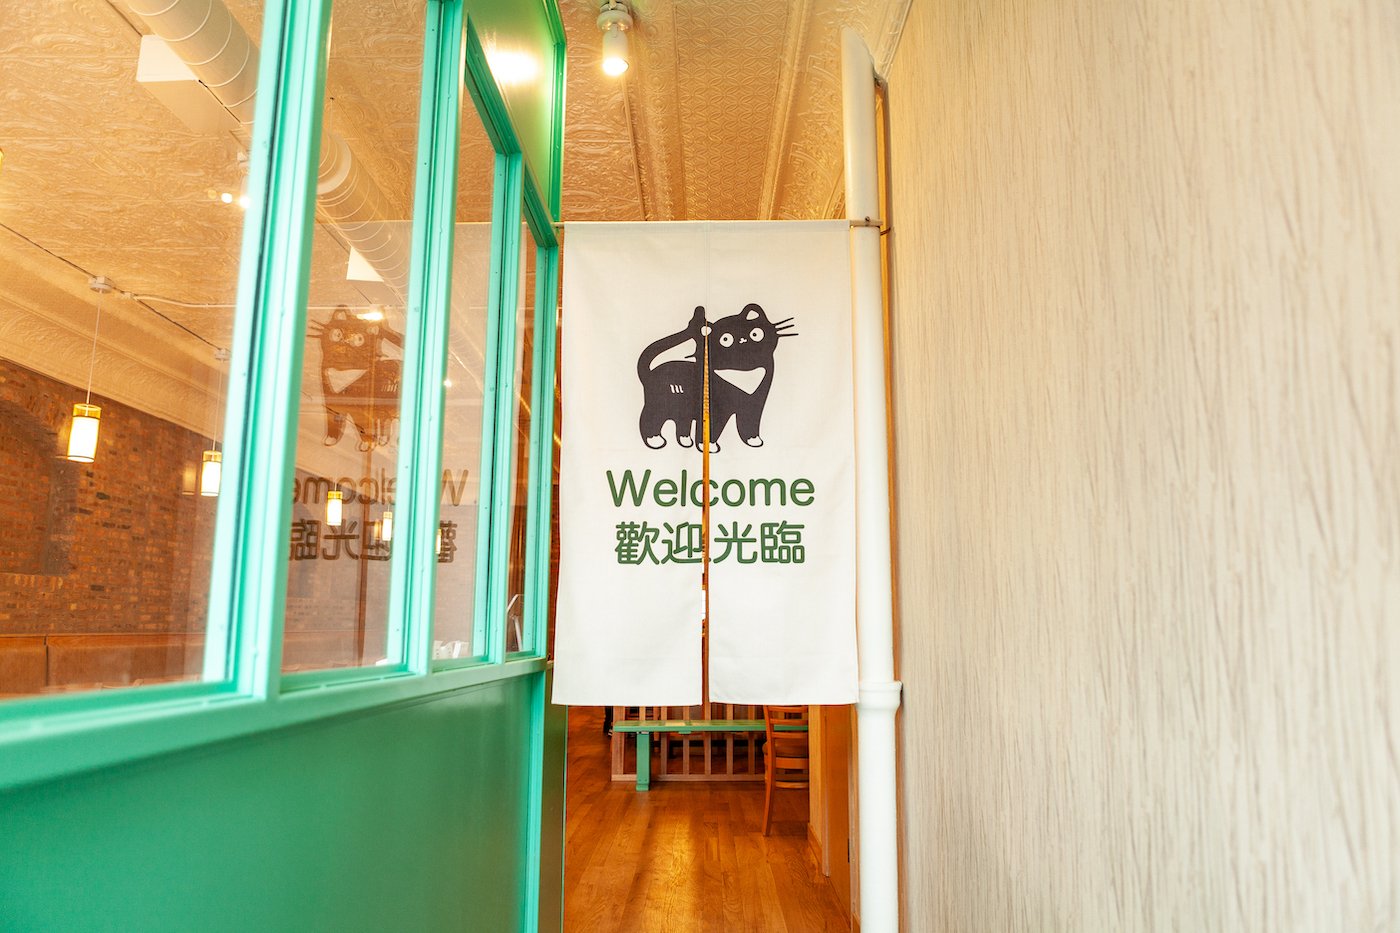 A cat logo on a partitioned curtain that says welcome in a restaurant entryway